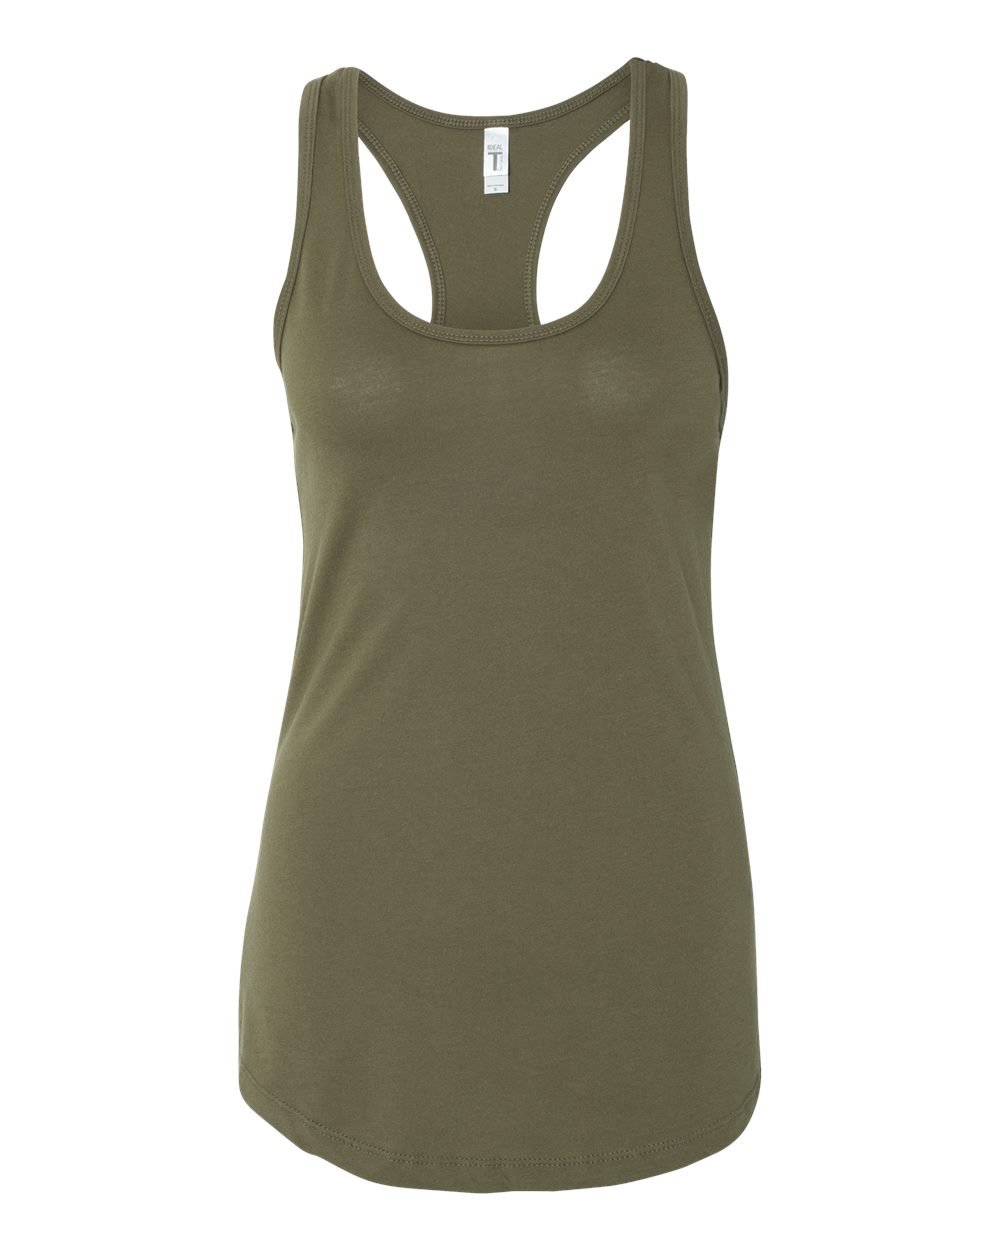 Next Level Ideal Racerback Tank Military Green X-Large (Pack of 5)